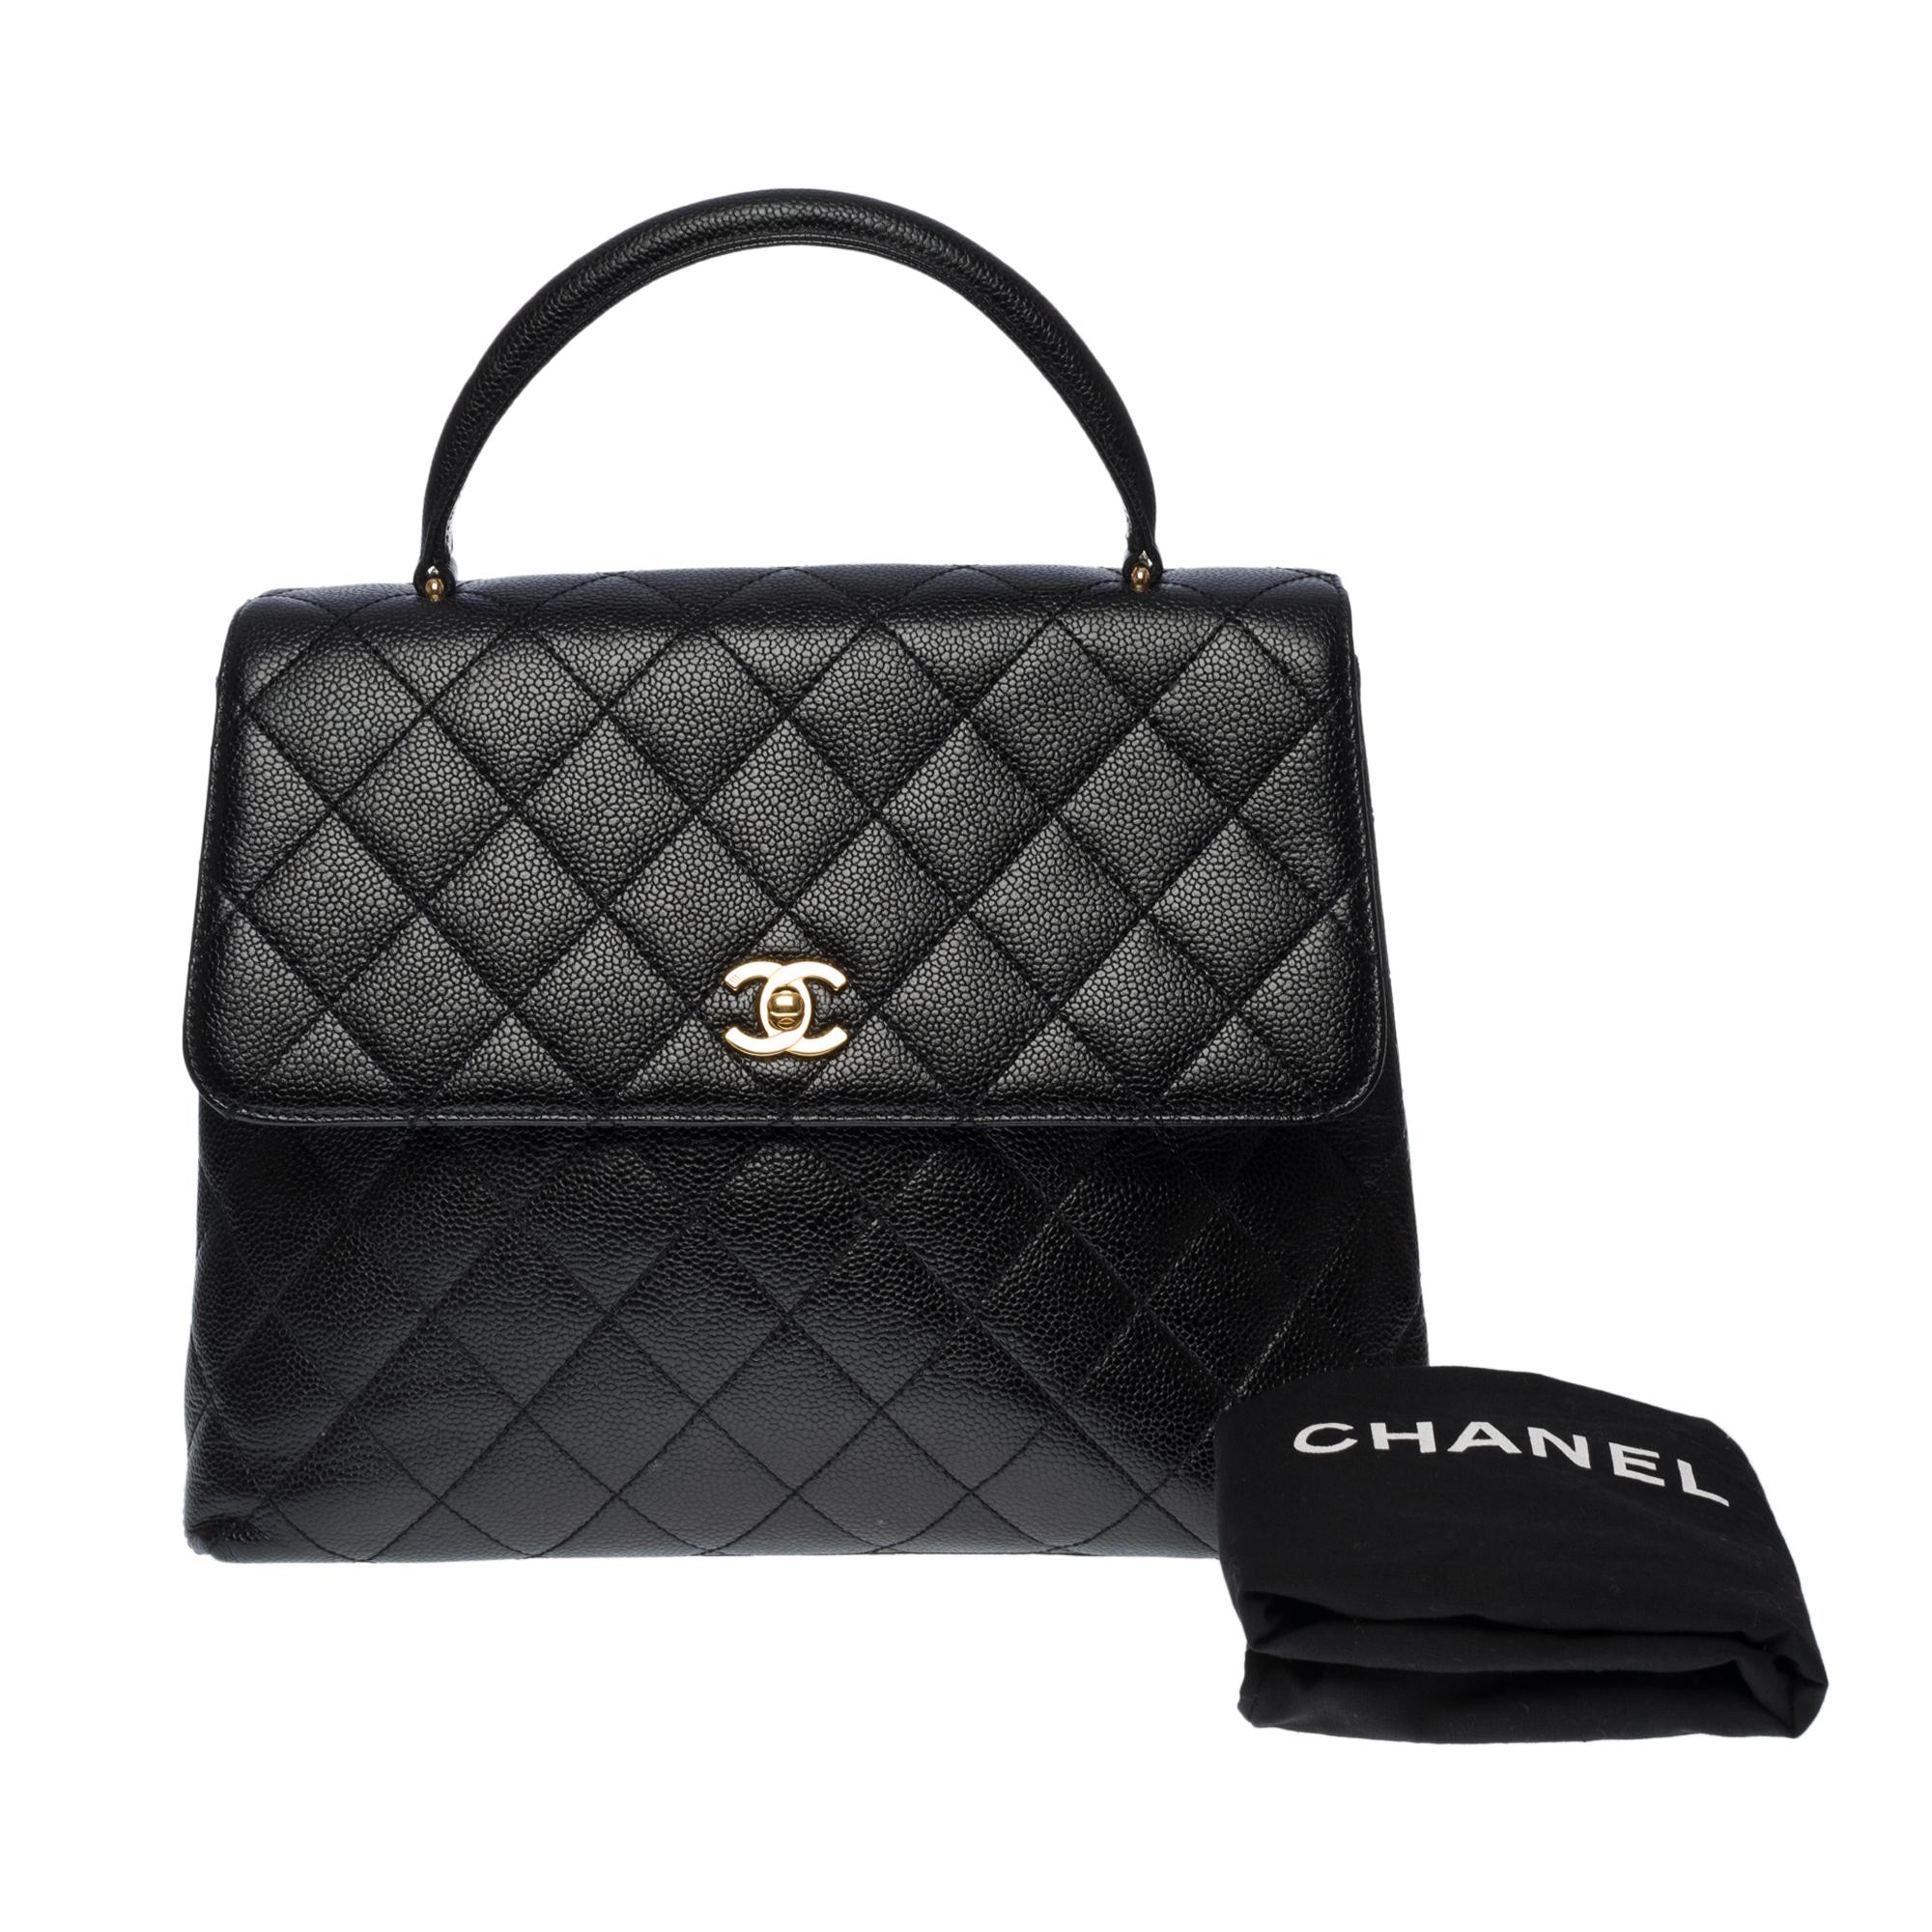 Amazing Chanel Coco handle handbag in black caviar quilted leather, GHW 3